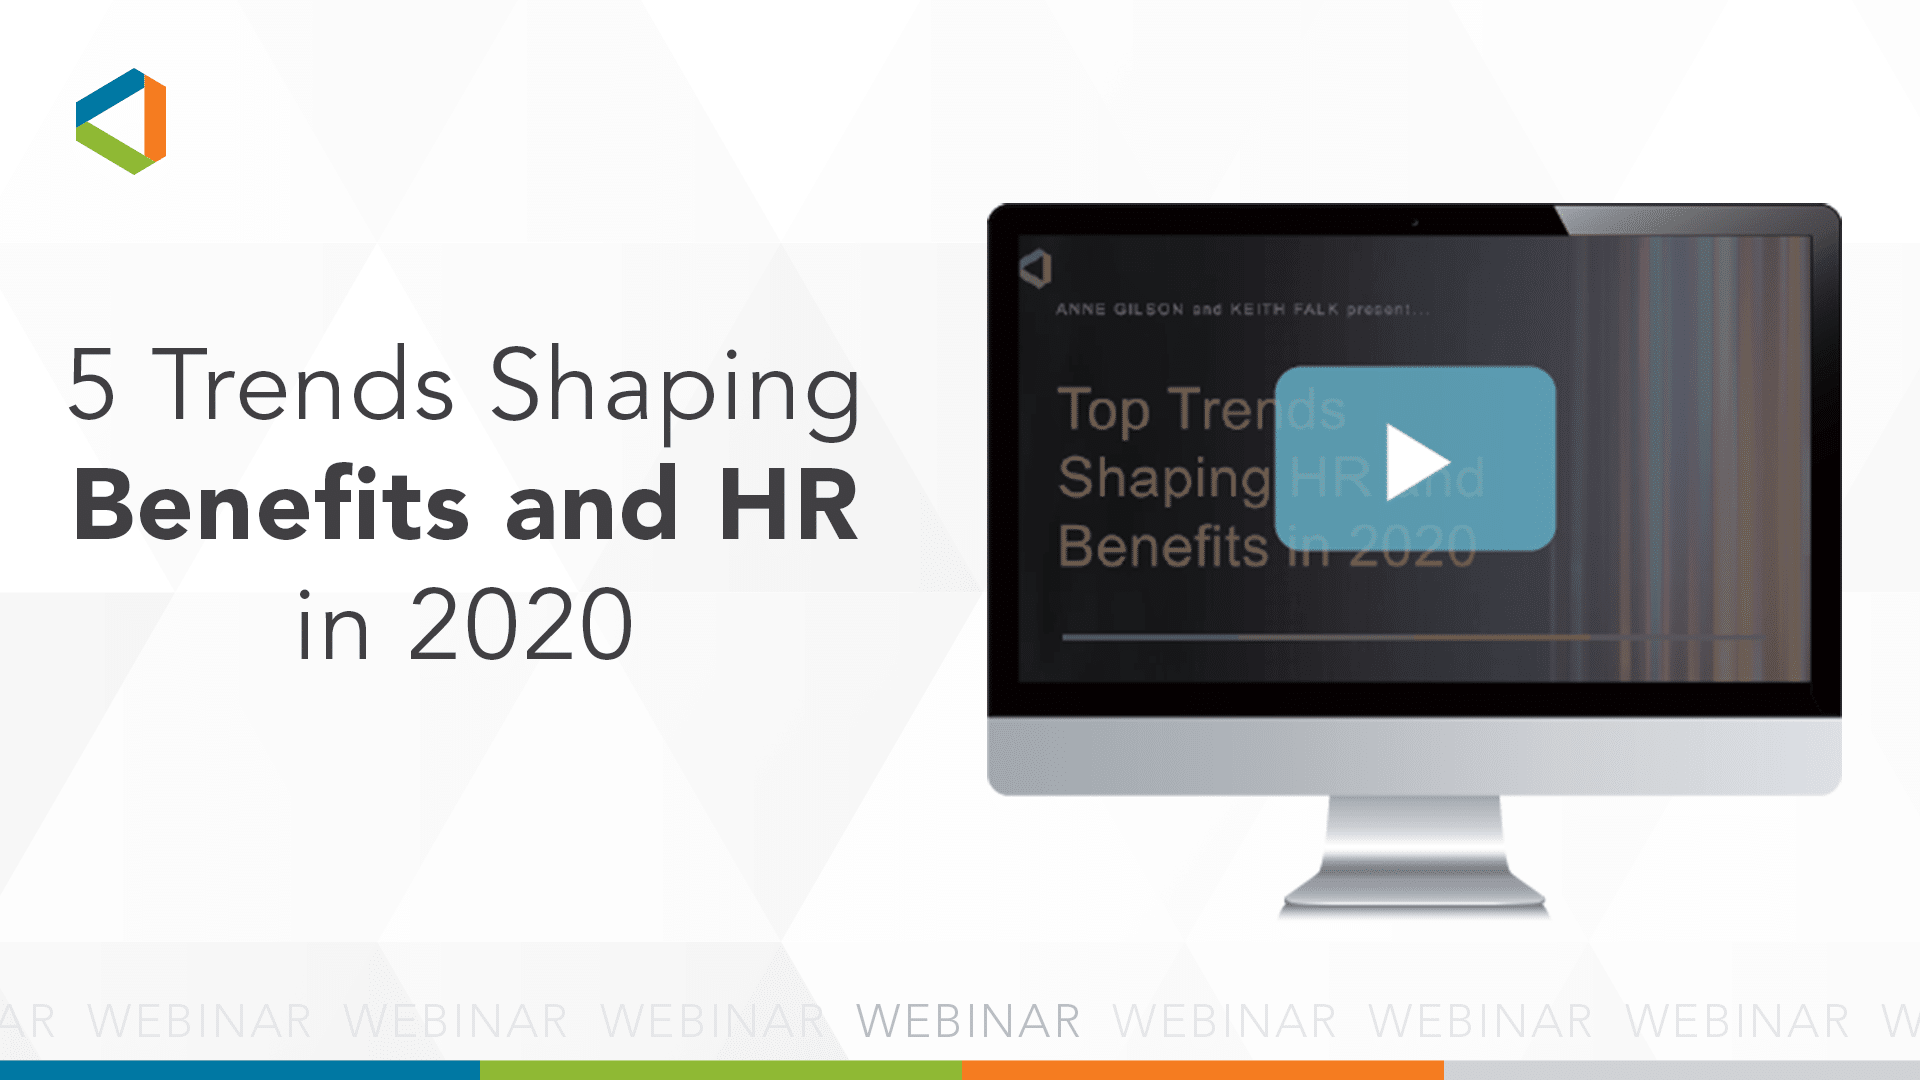 Watch the 5 Trends Shaping HR and Benefits in 2020 Webinar Now